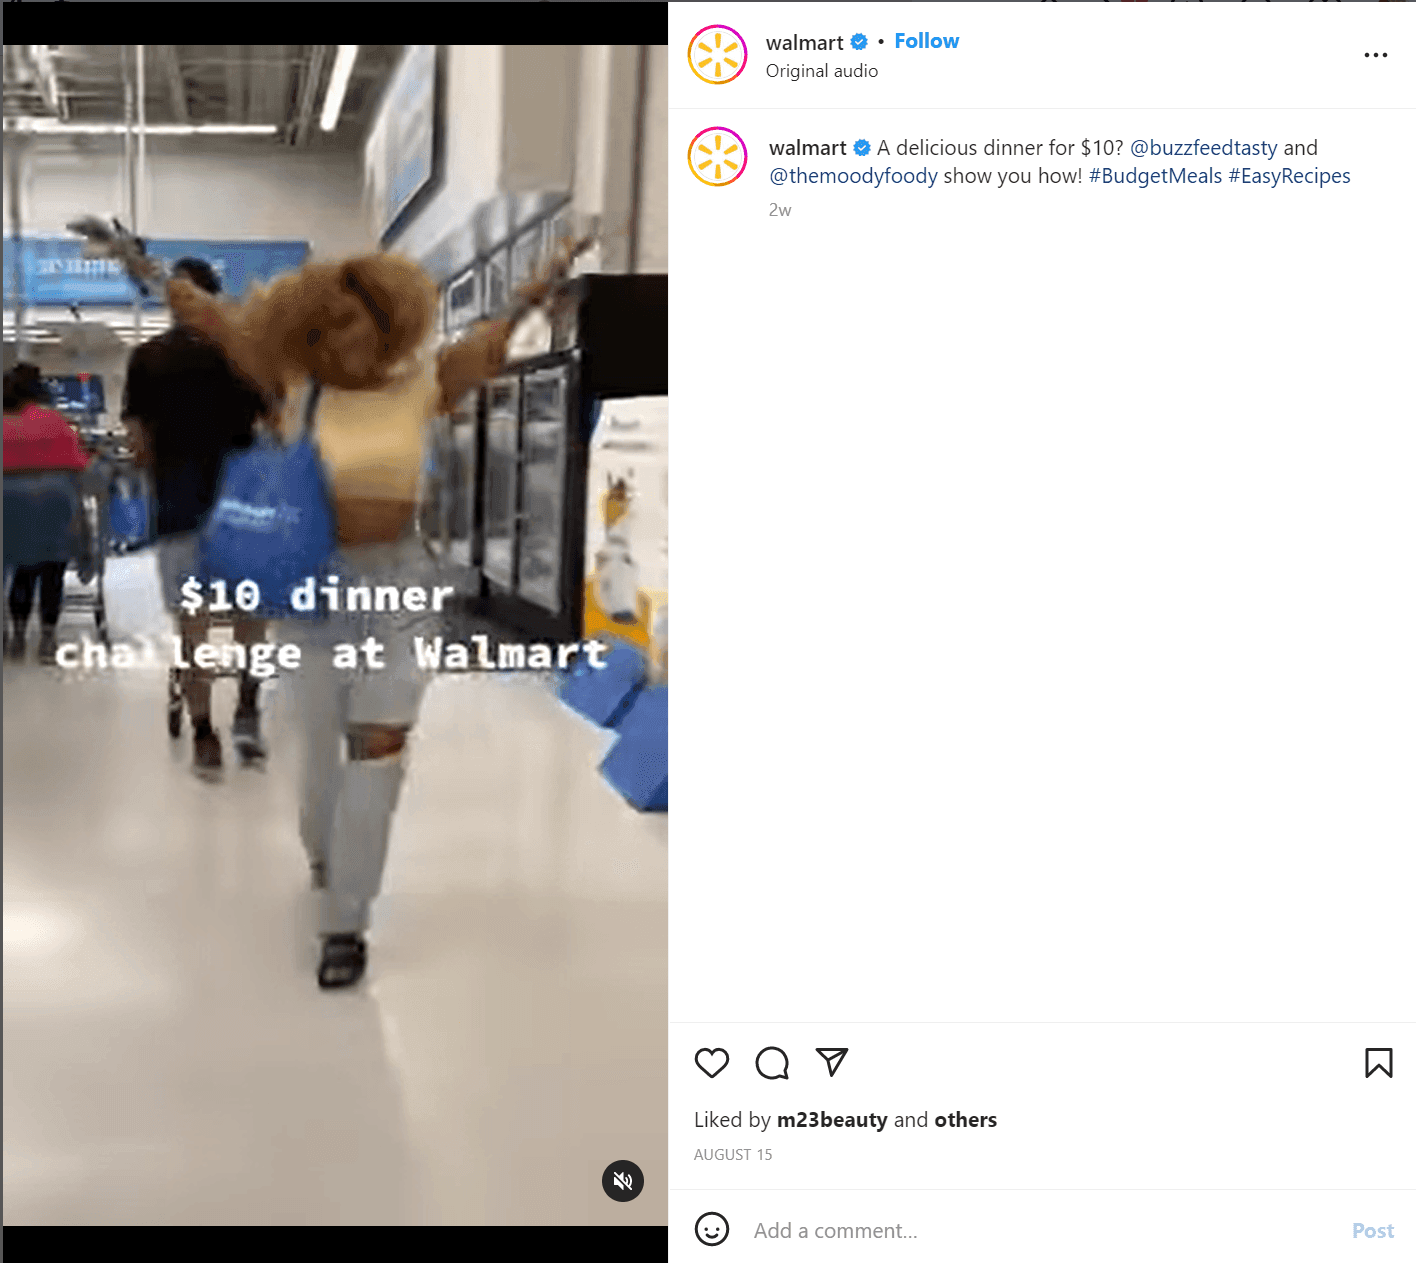 Walmart using challenges as a marketing strategy